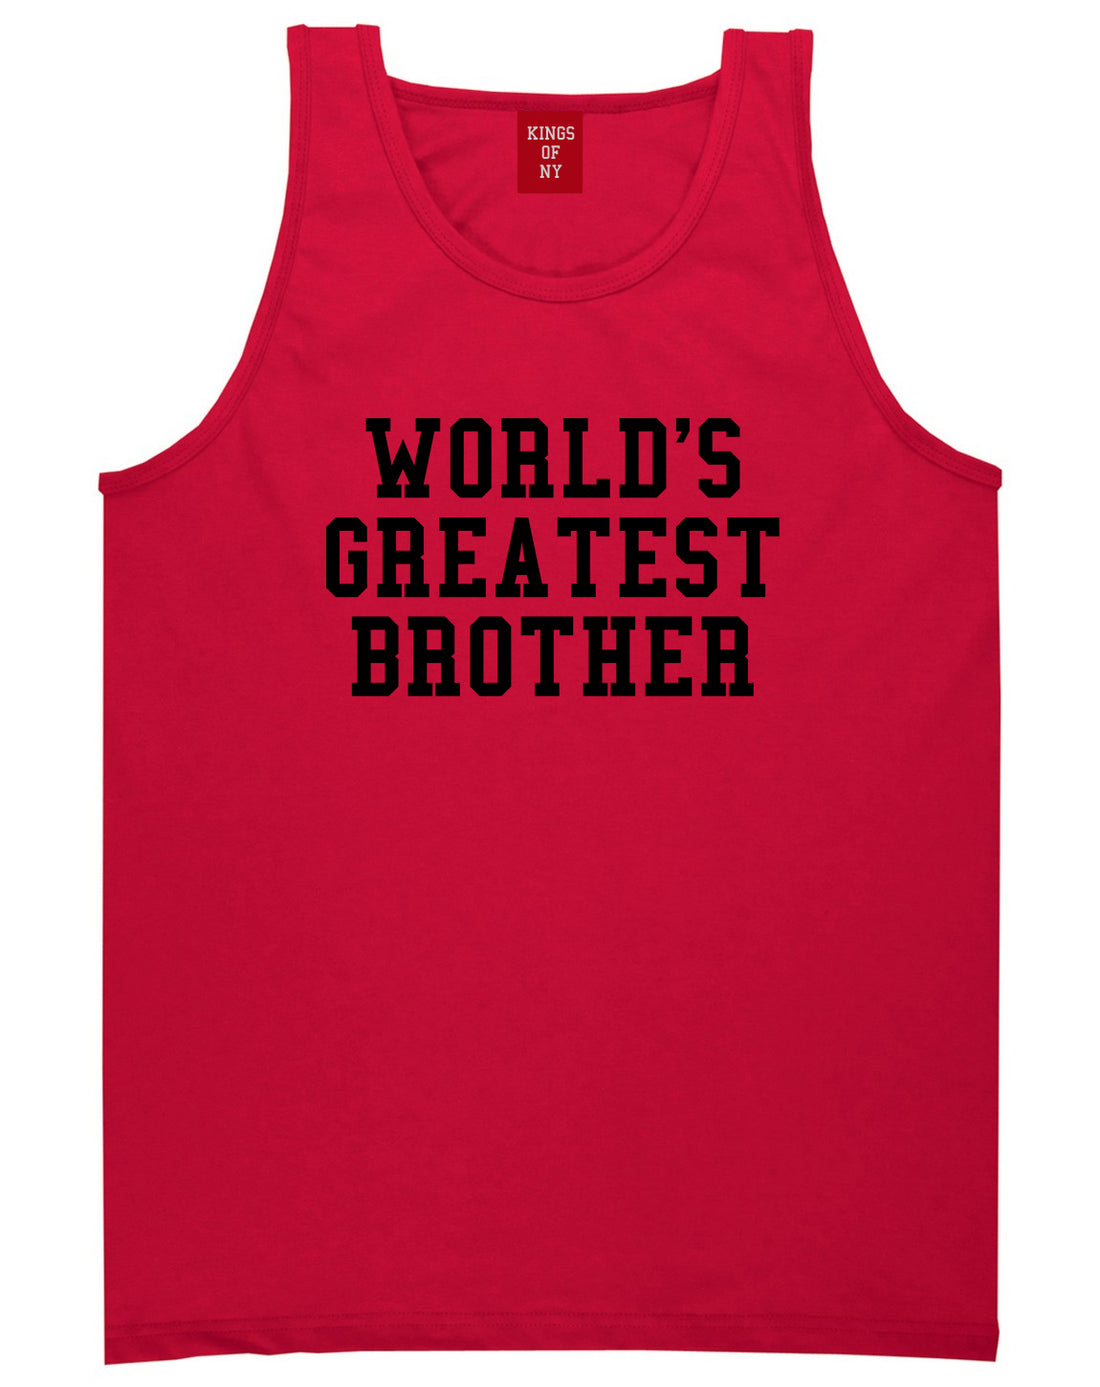 Worlds Greatest Brother Funny Birthday Mens Tank Top T-Shirt Red